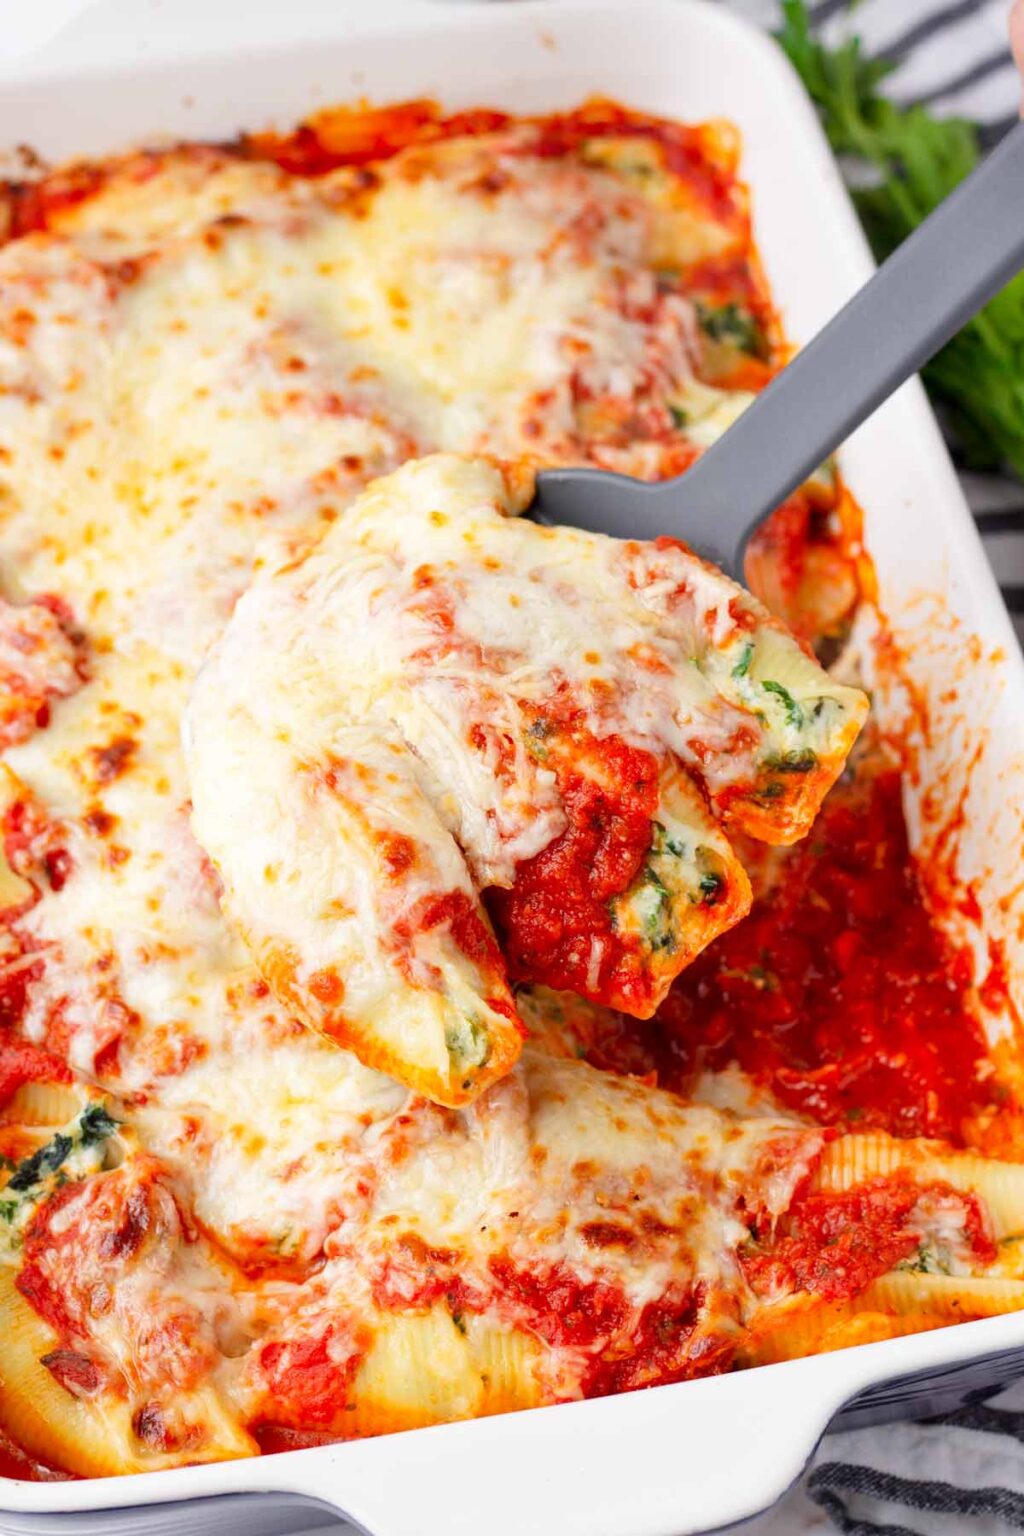 Spinach Stuffed Shells - Cooking For My Soul